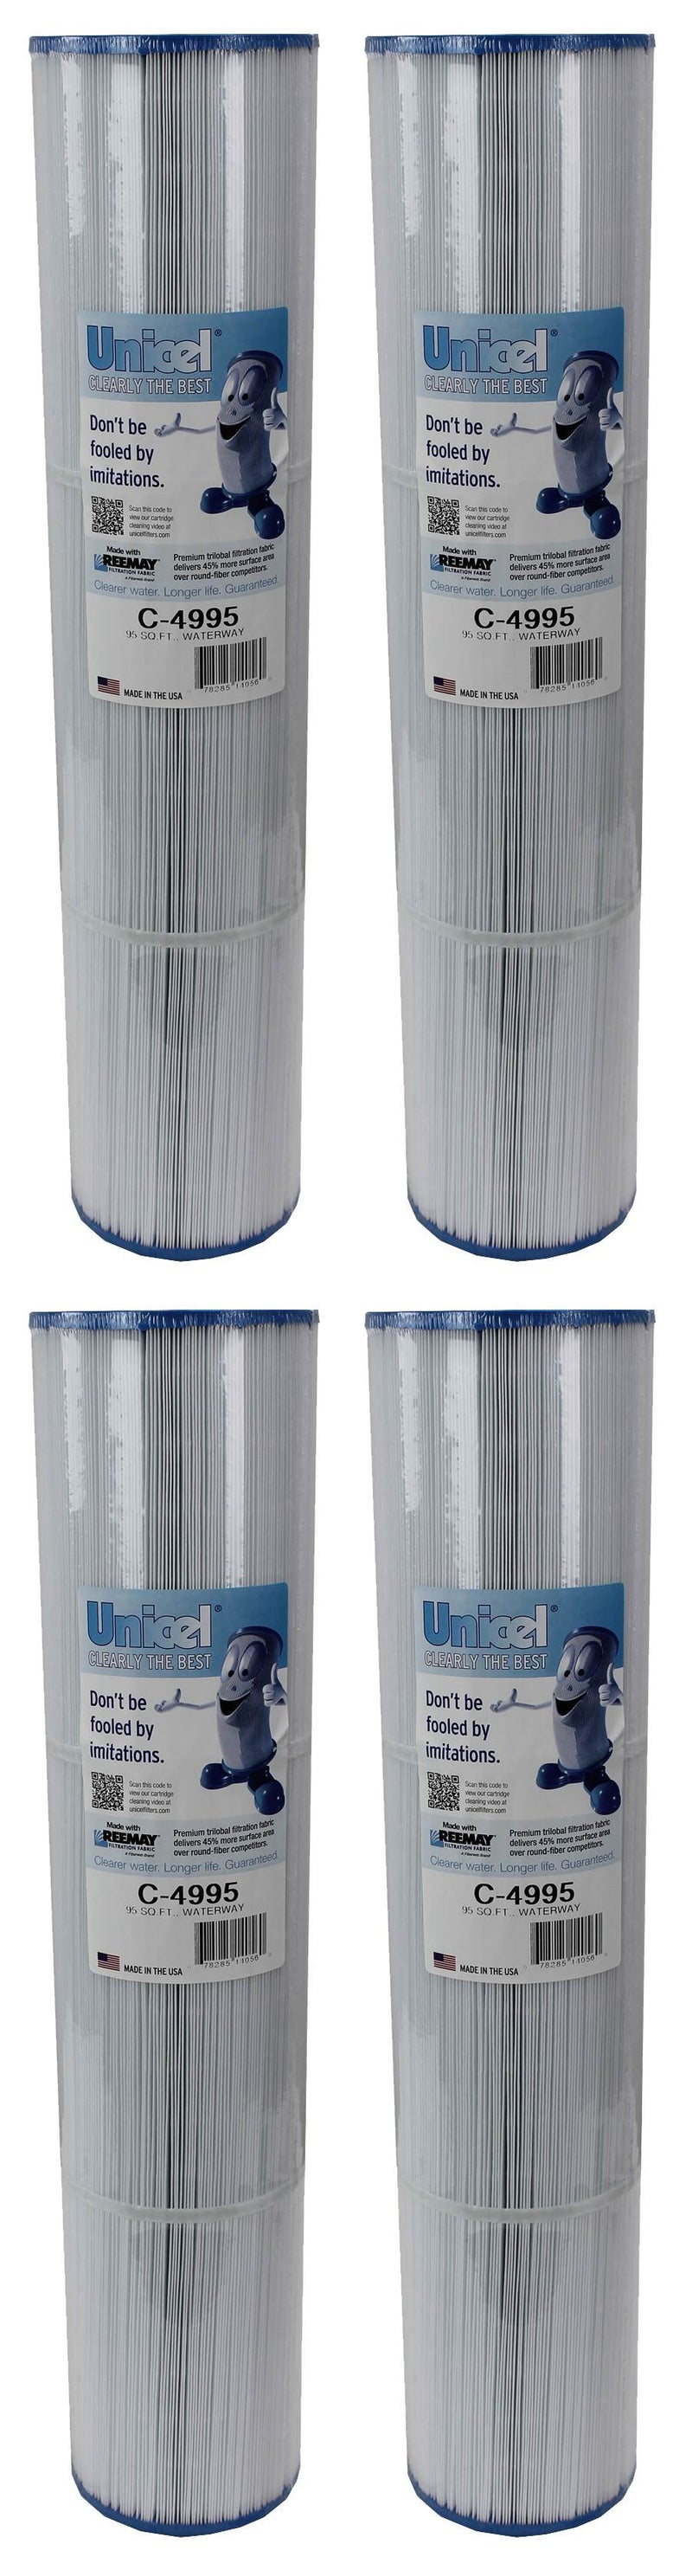 4) New Unicel C-4995 Spa Replacement Cartridge Filters 95 Sq Ft PCAL100 FC-2940